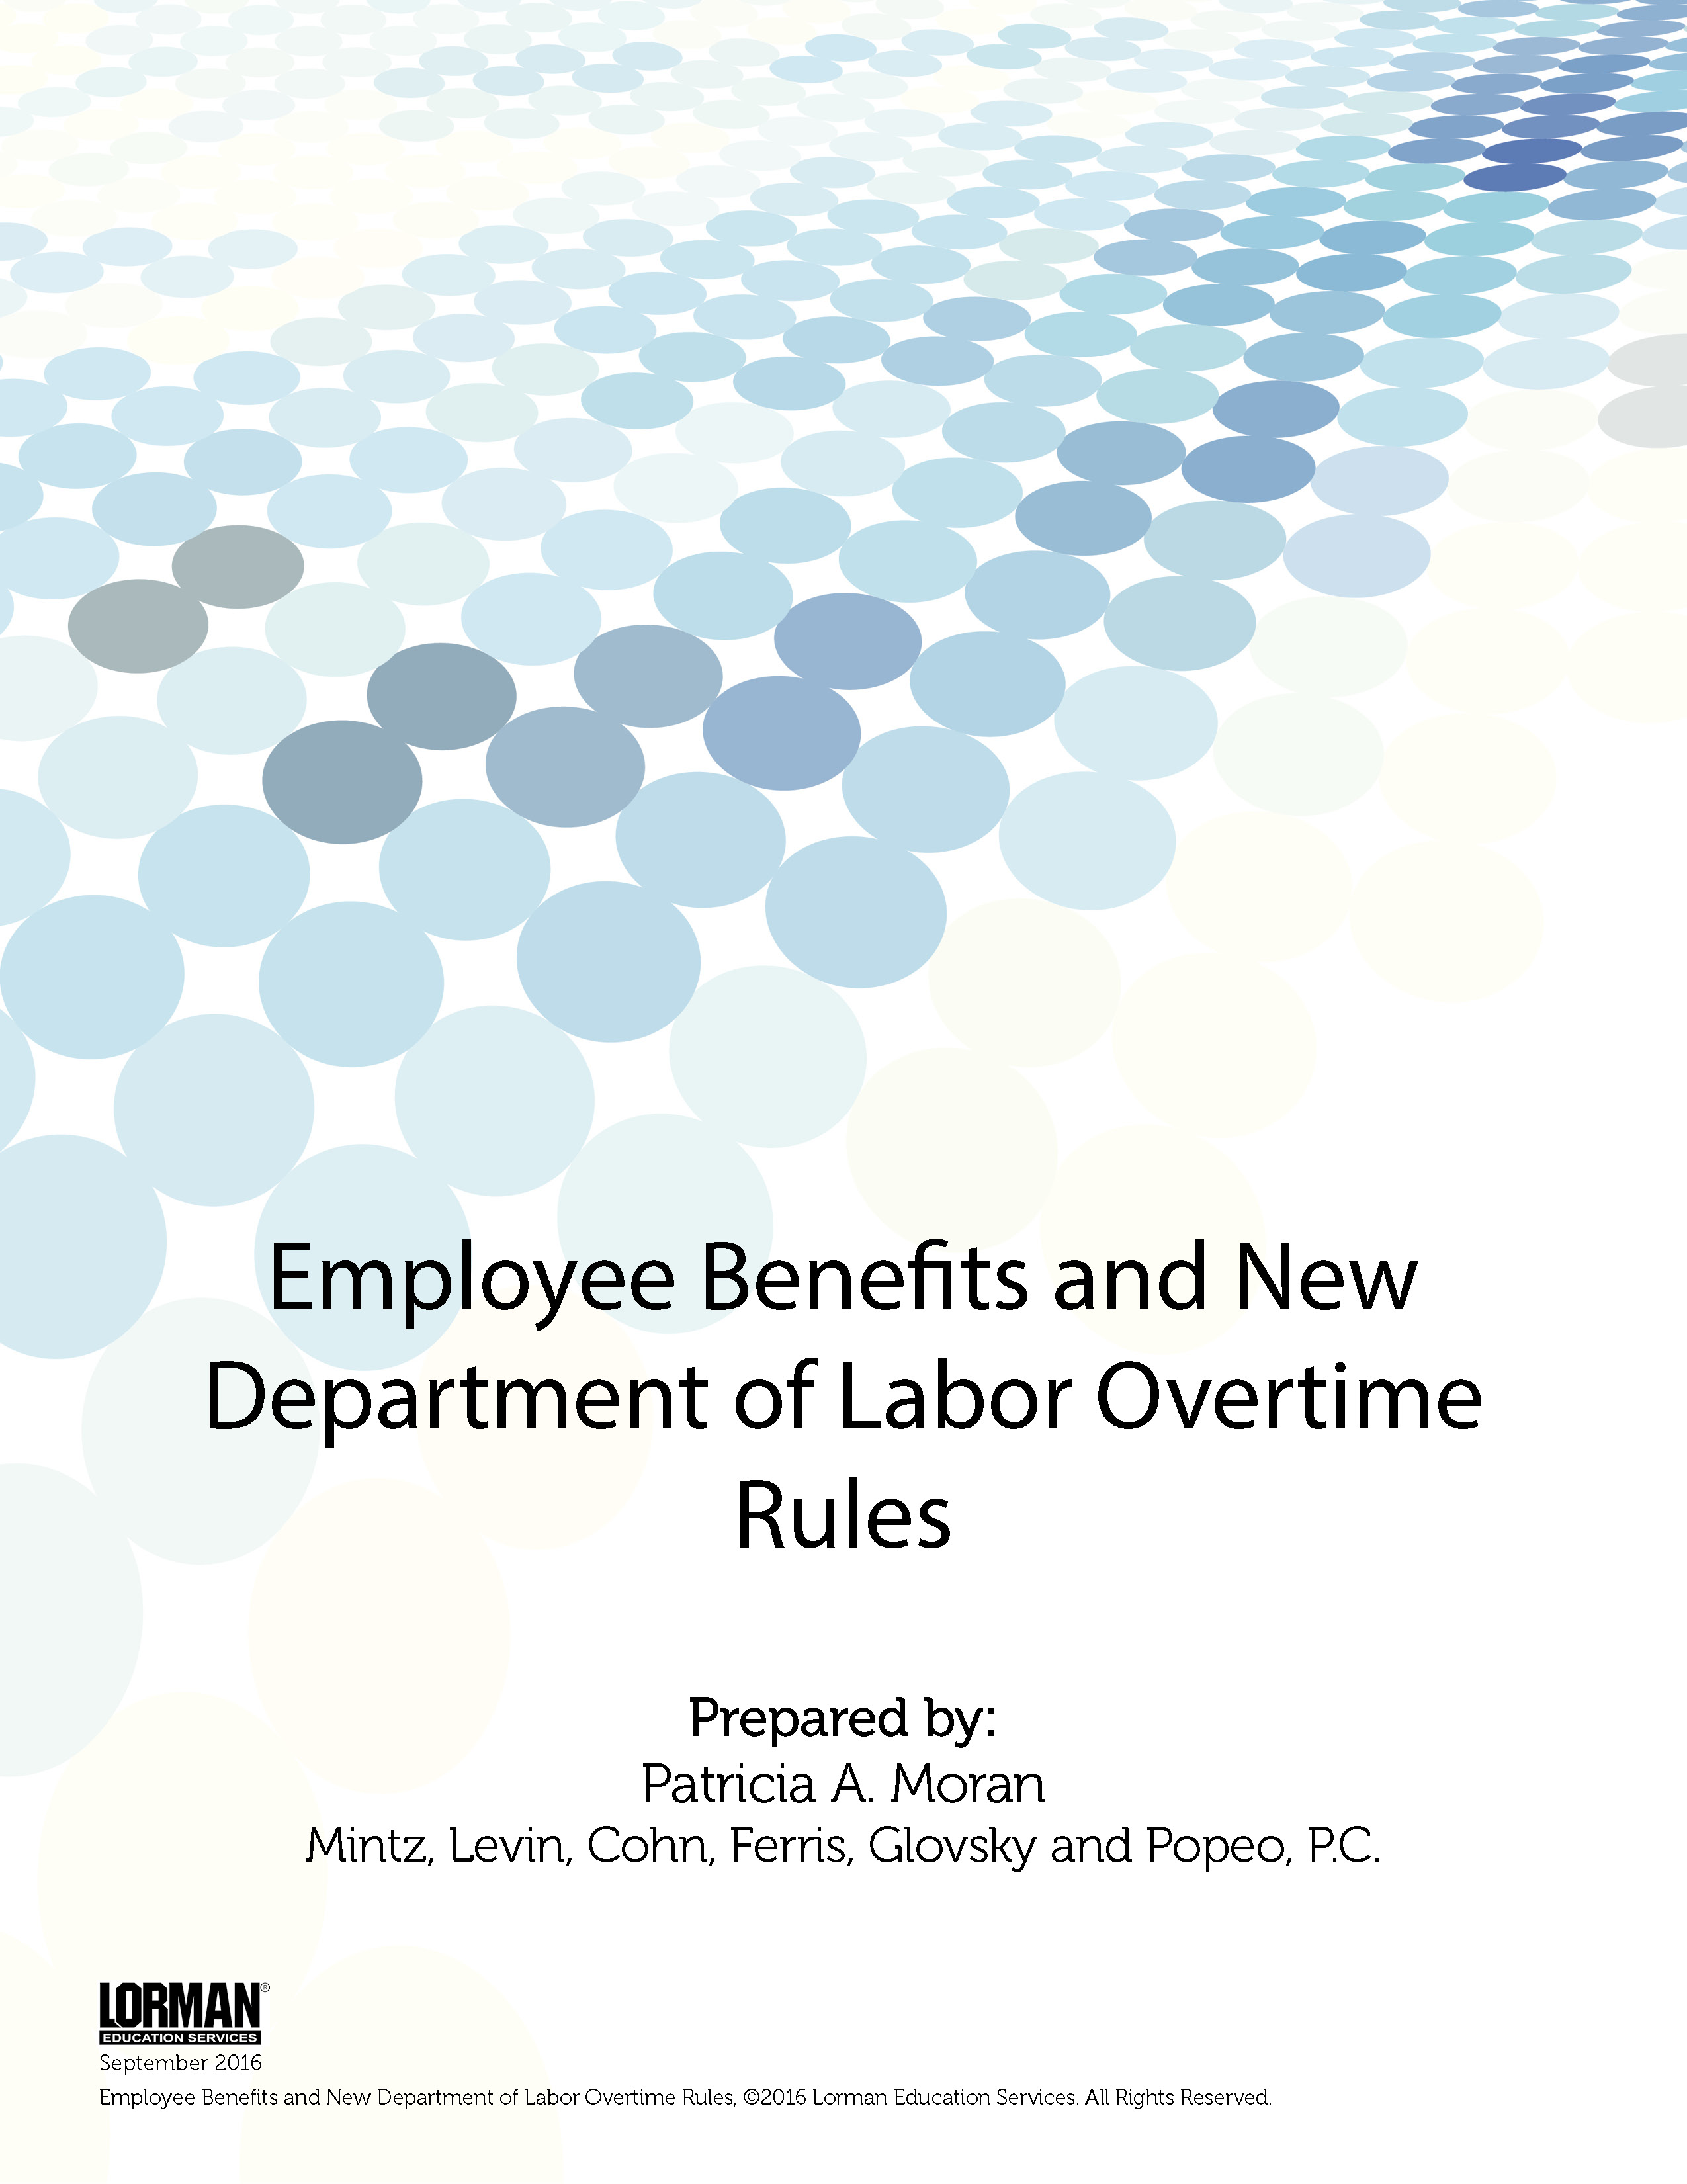 Employee Benefits and New Department of Labor Overtime Rules